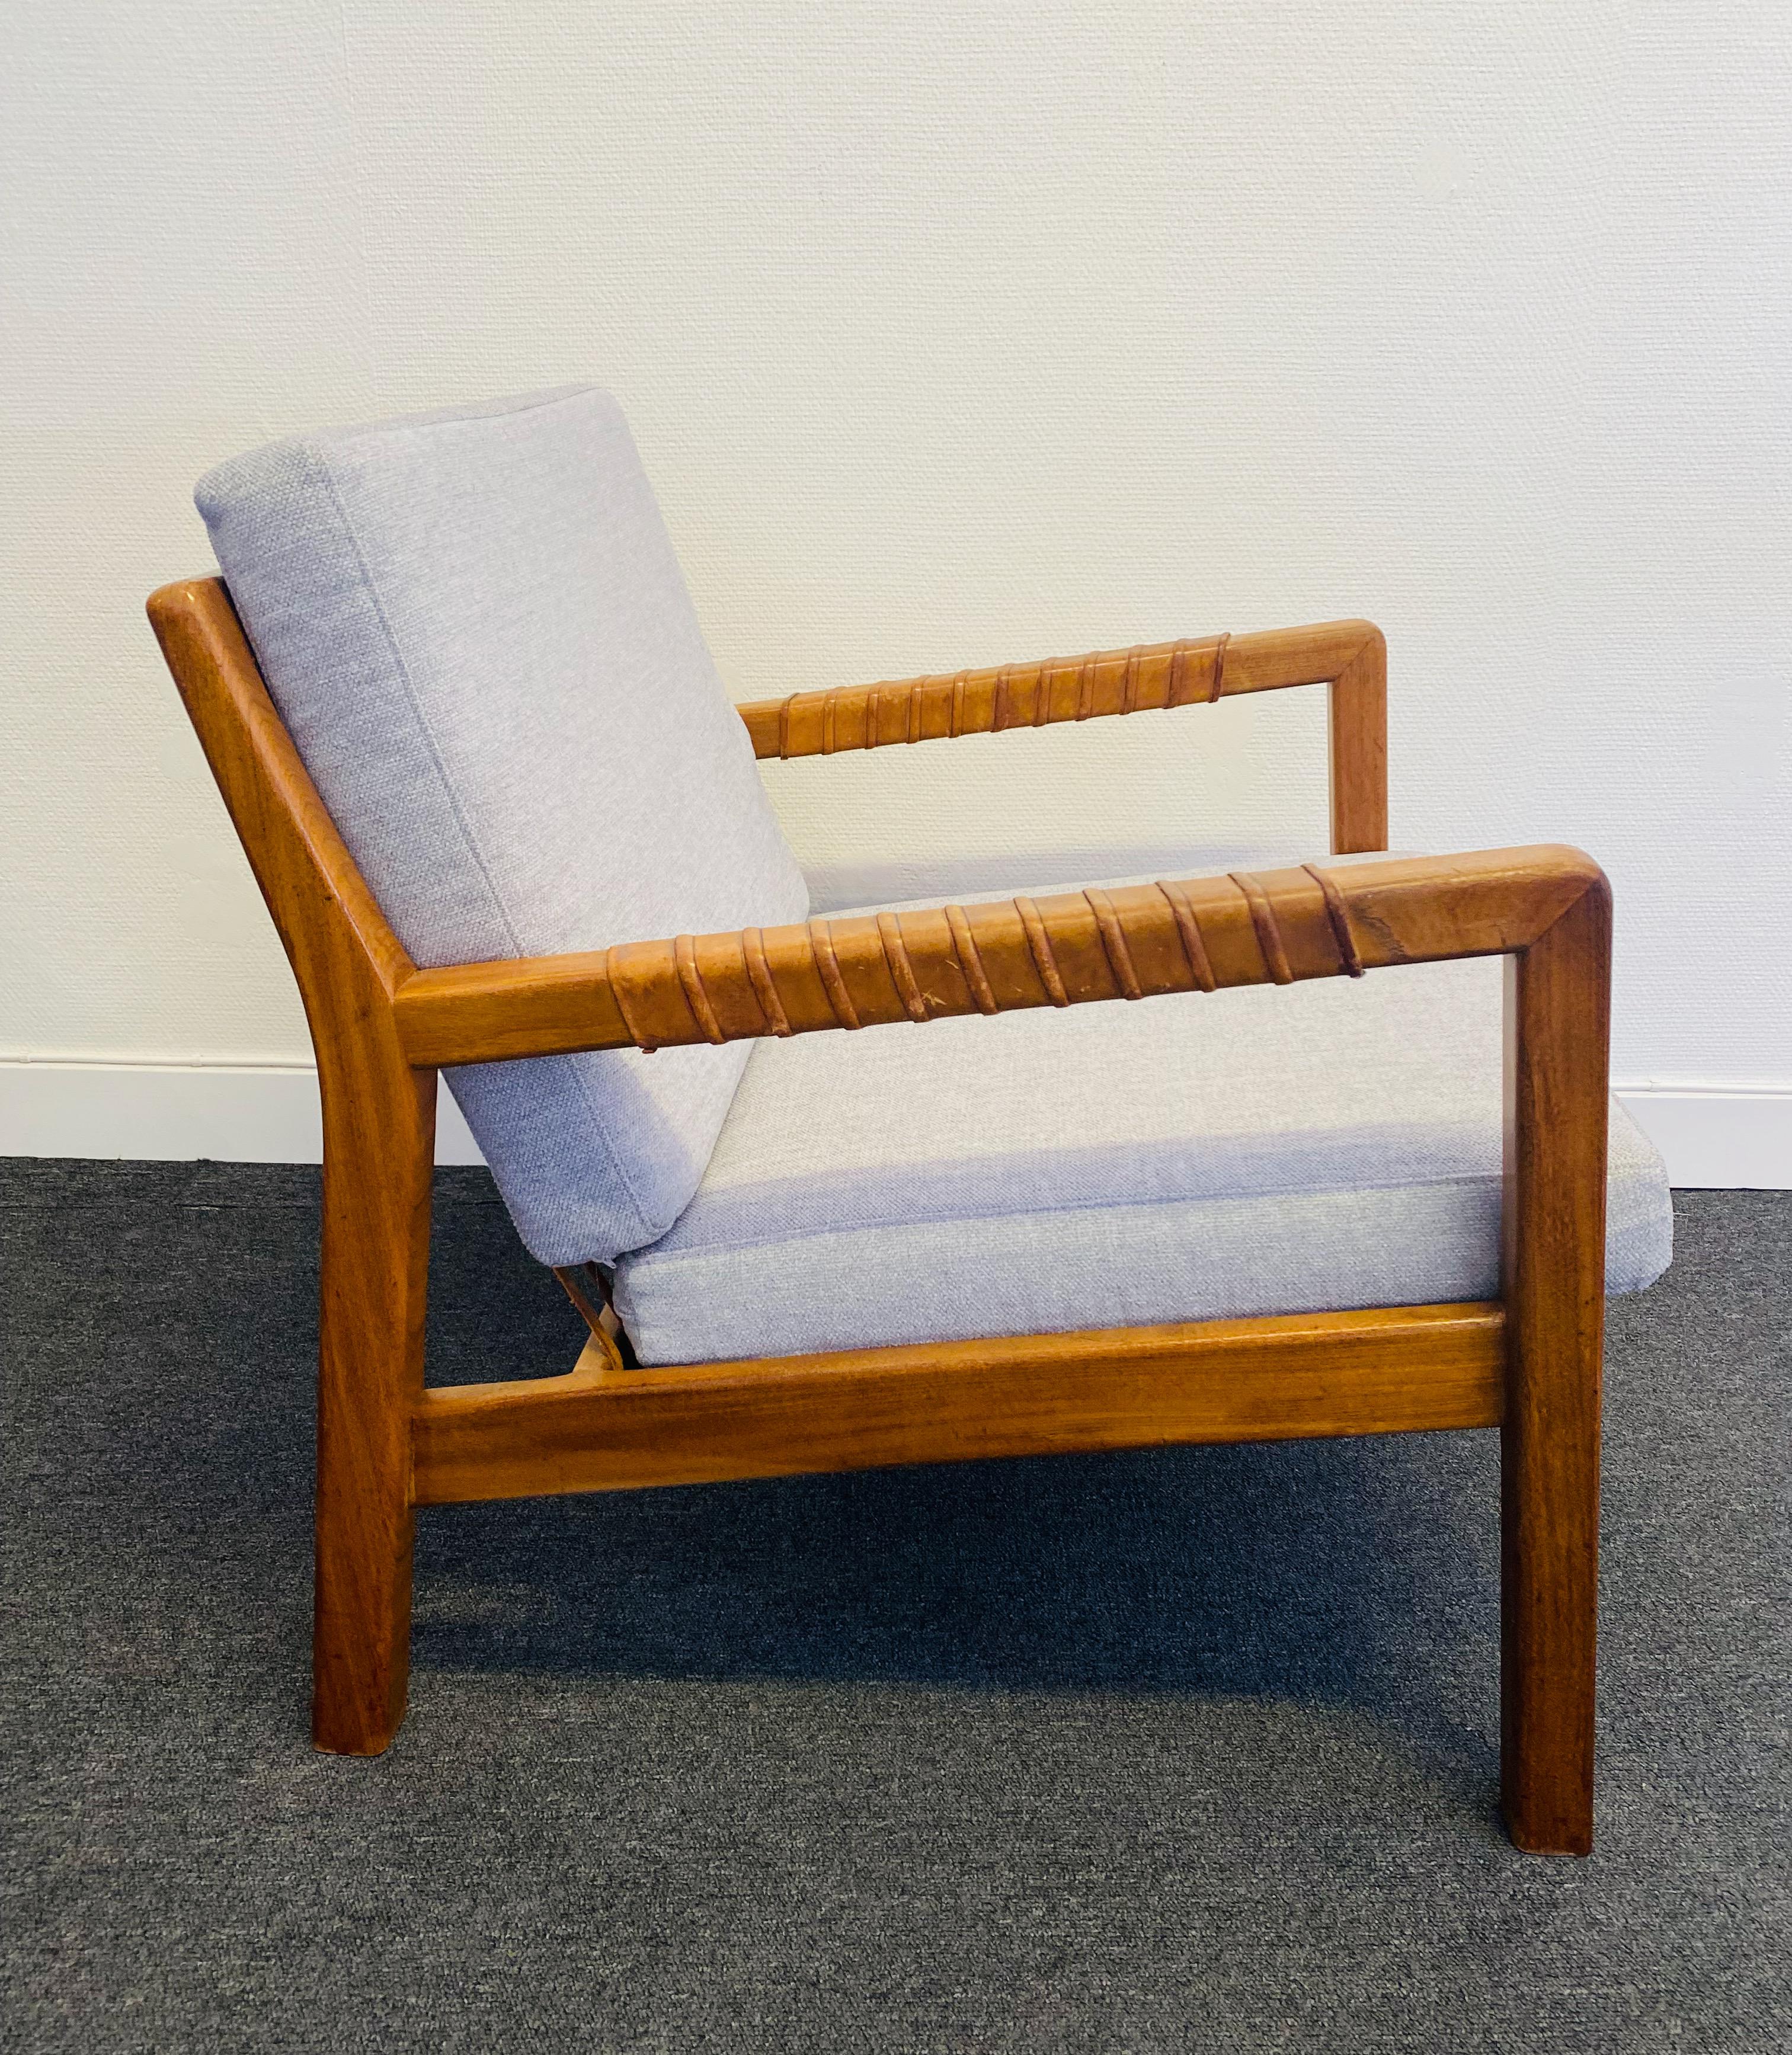 Rialto chaise lounge by Carl-Gustaf Hiort af Ornäs In Good Condition For Sale In Klintehamn, SE